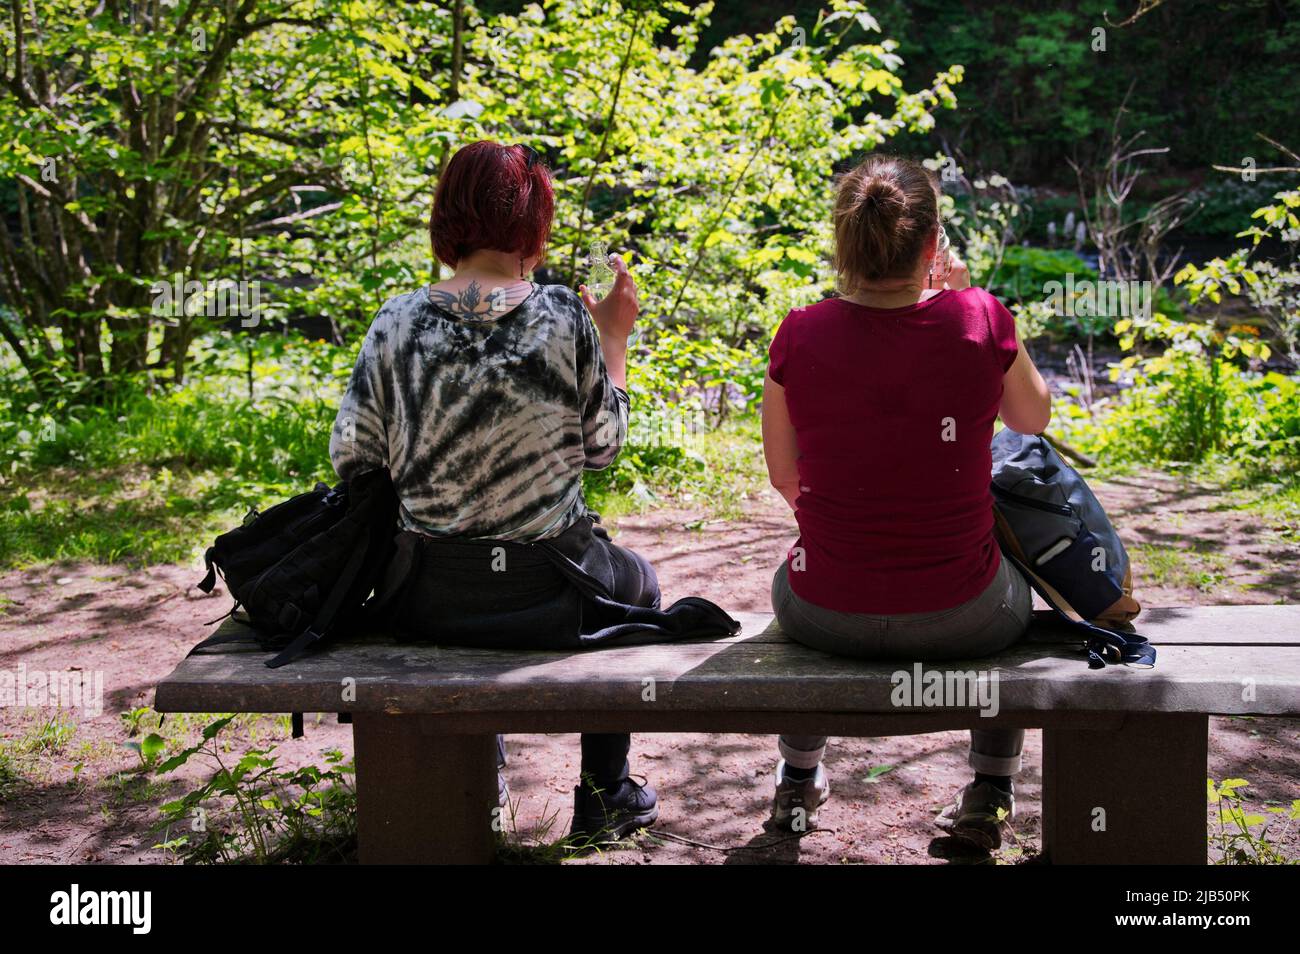 Mature women sitting on a bench in nature Stock Photo